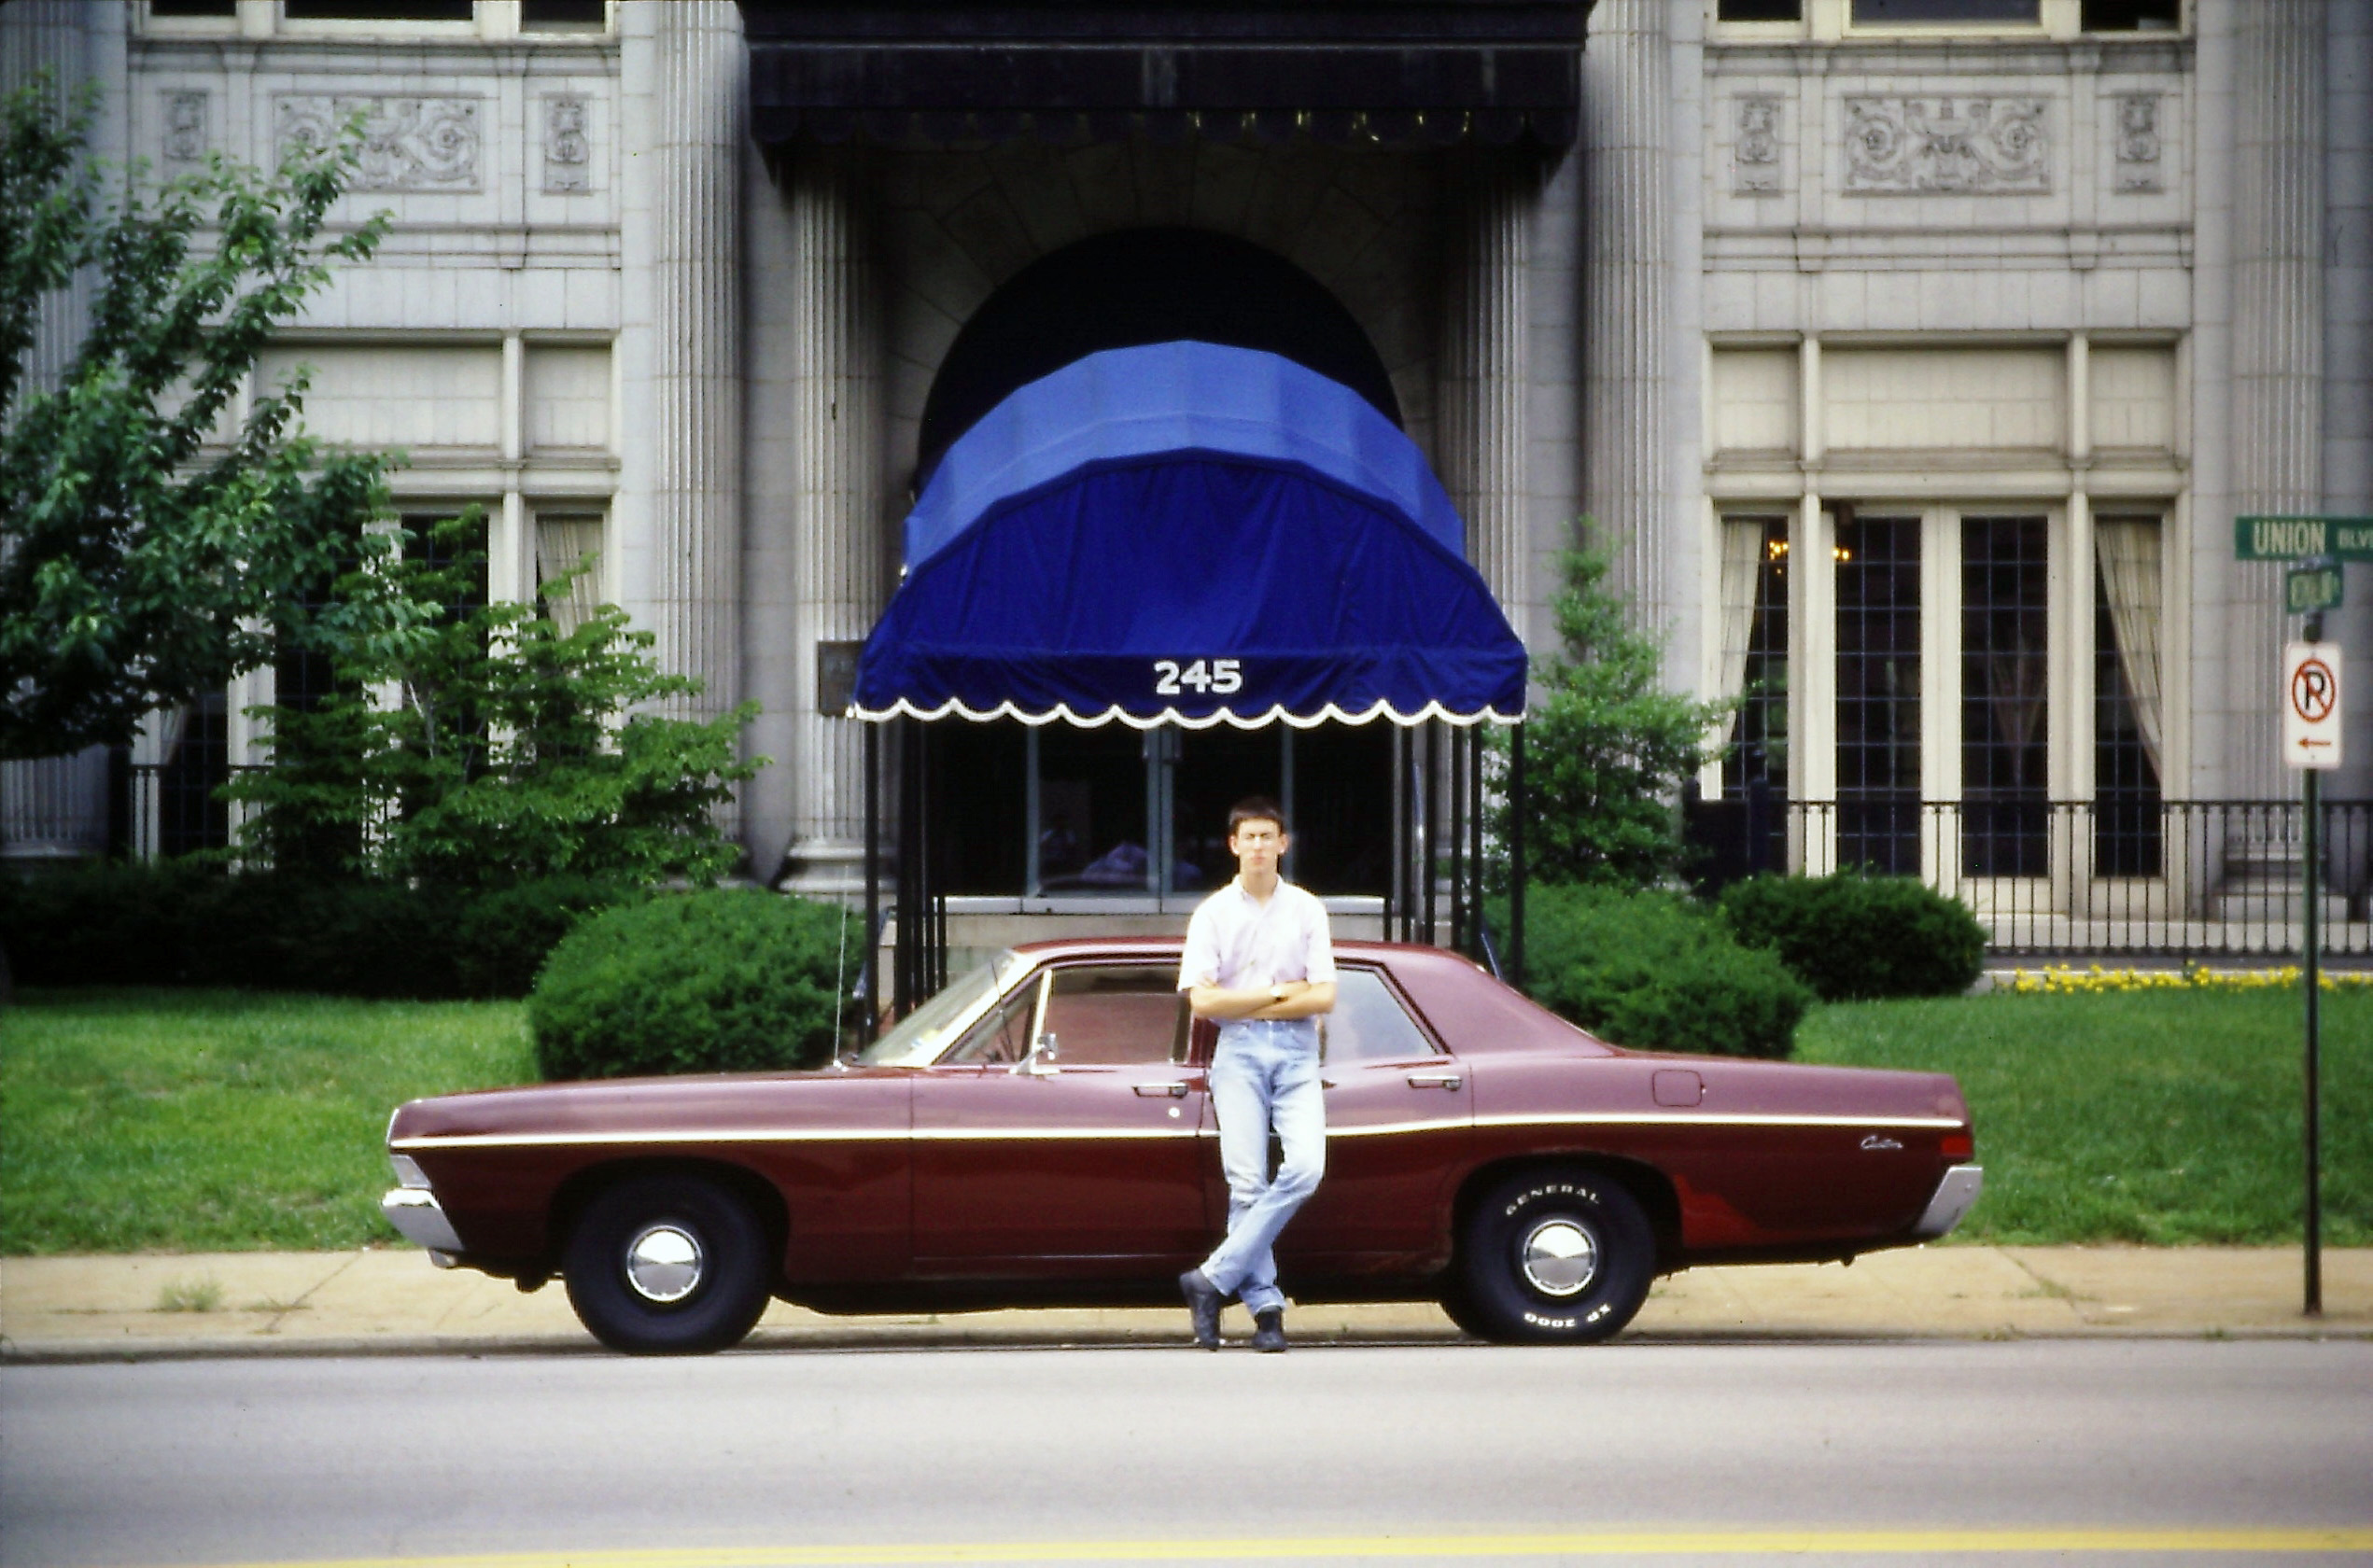 The author as a youth standing next to a 1968 maroon Ford Galaxie